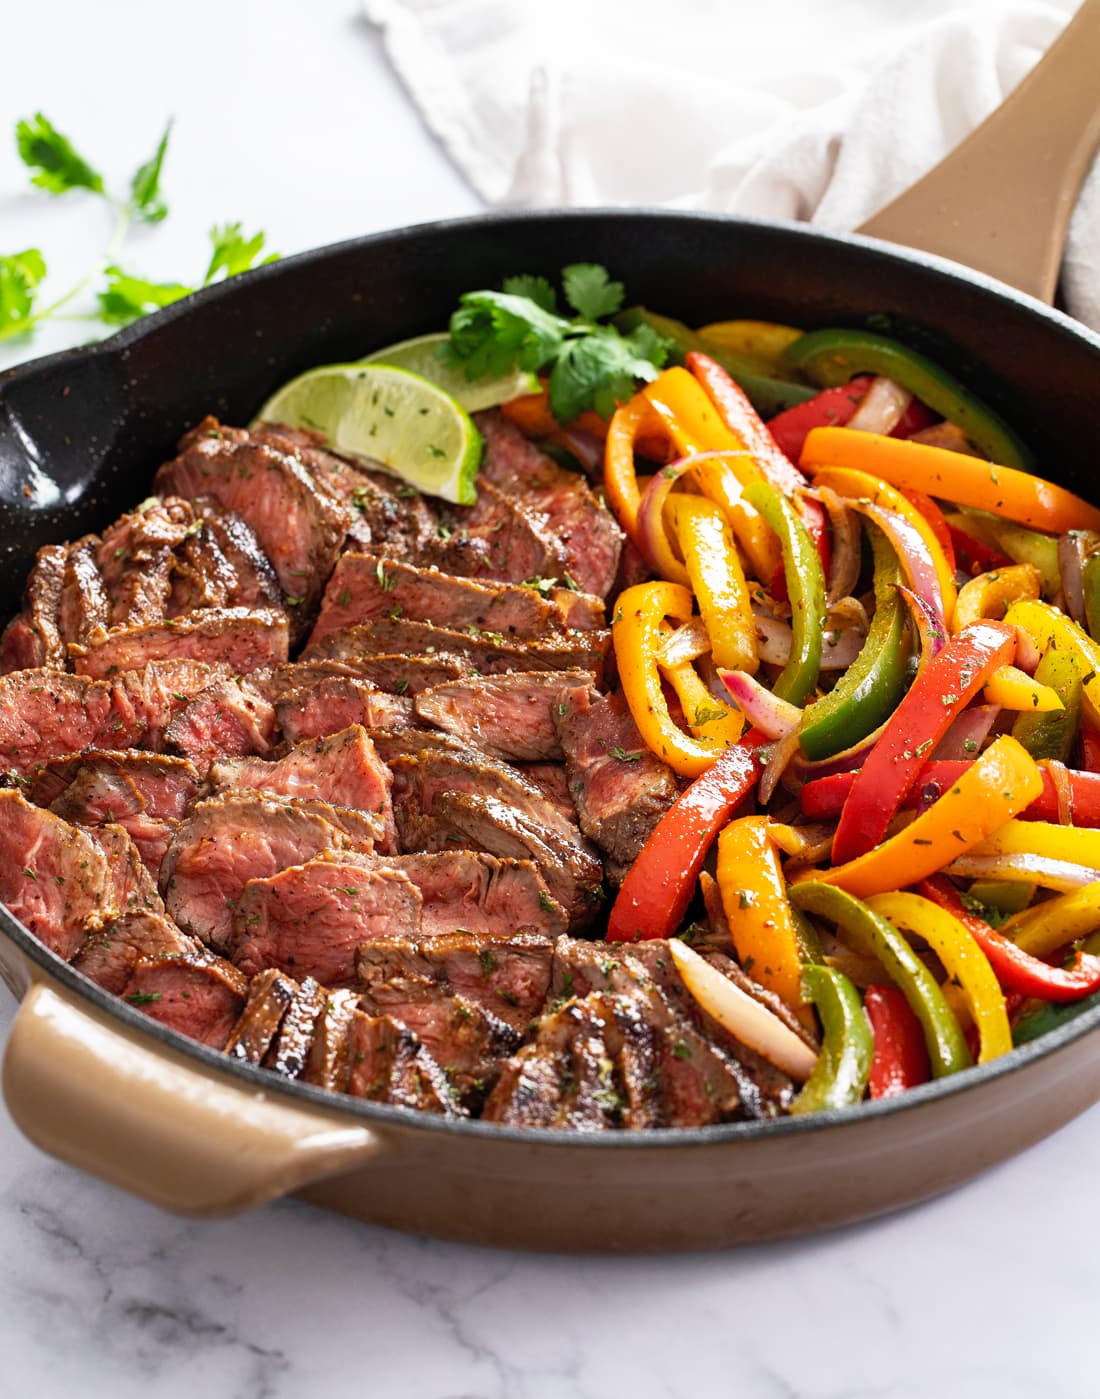 A skillet filled with Steak Fajitas with onions, peppers, and steak.